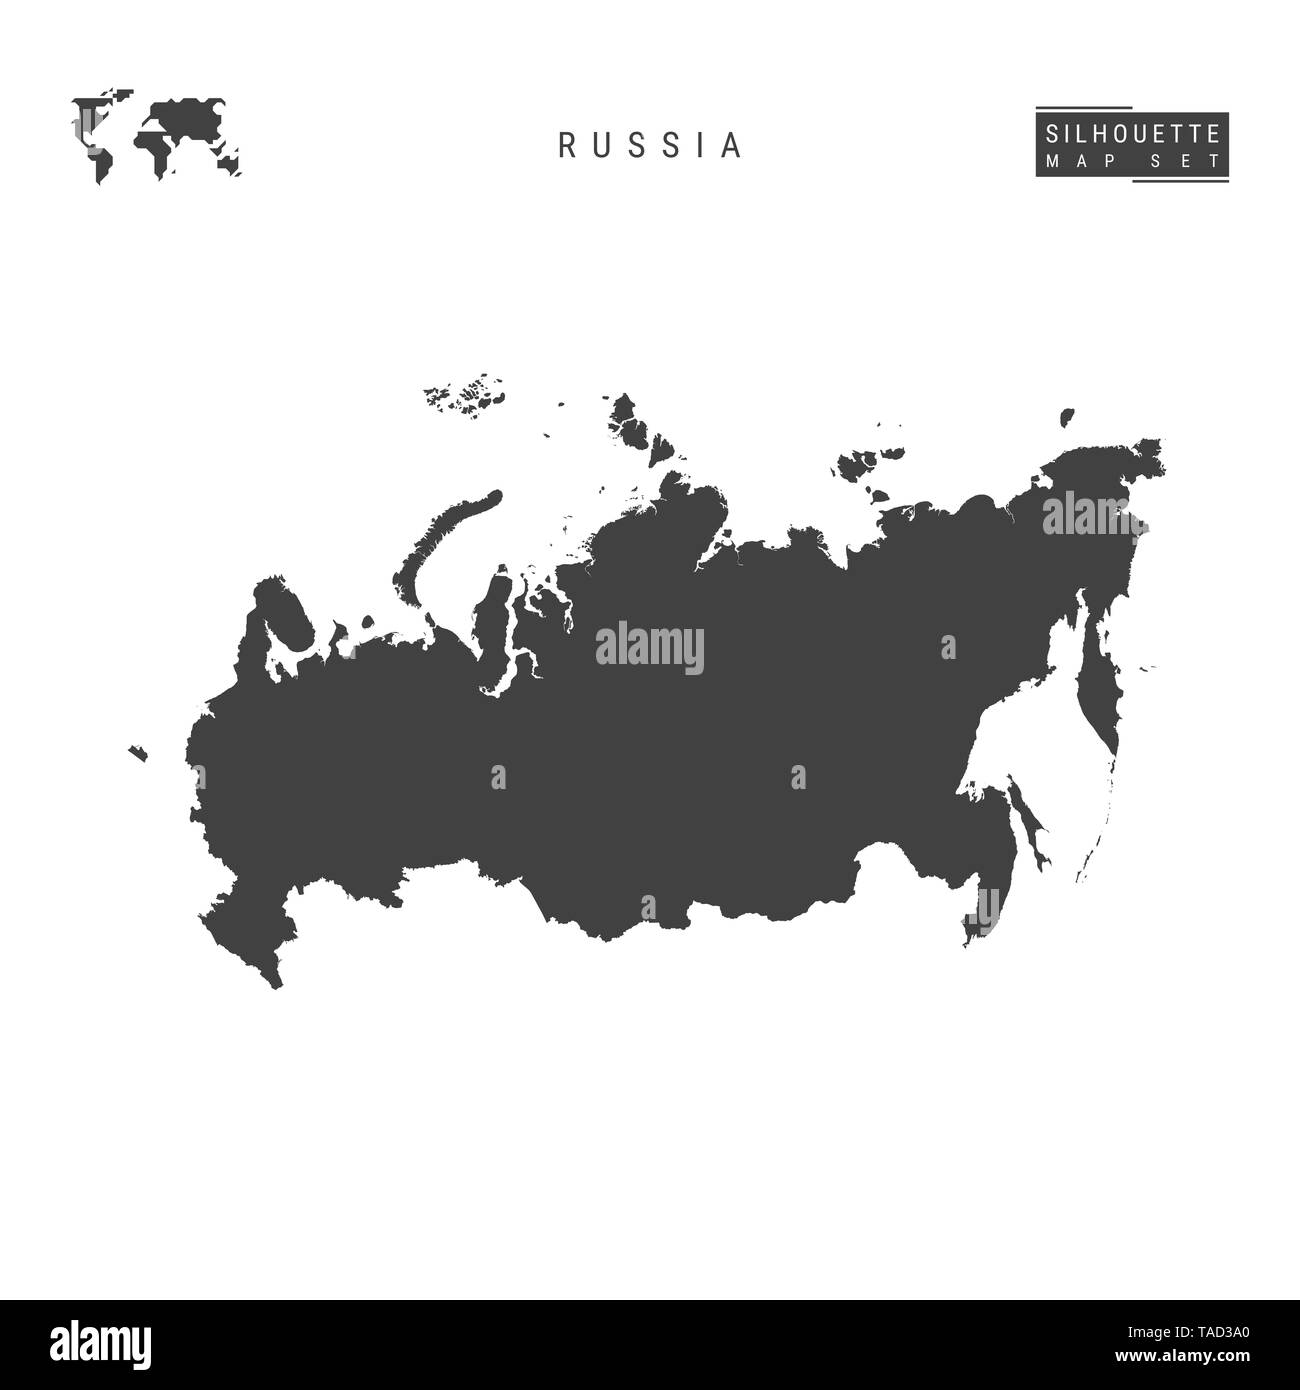 Russia Blank Map Isolated on White Background. High-Detailed Black Silhouette Map of Russia. Stock Photo